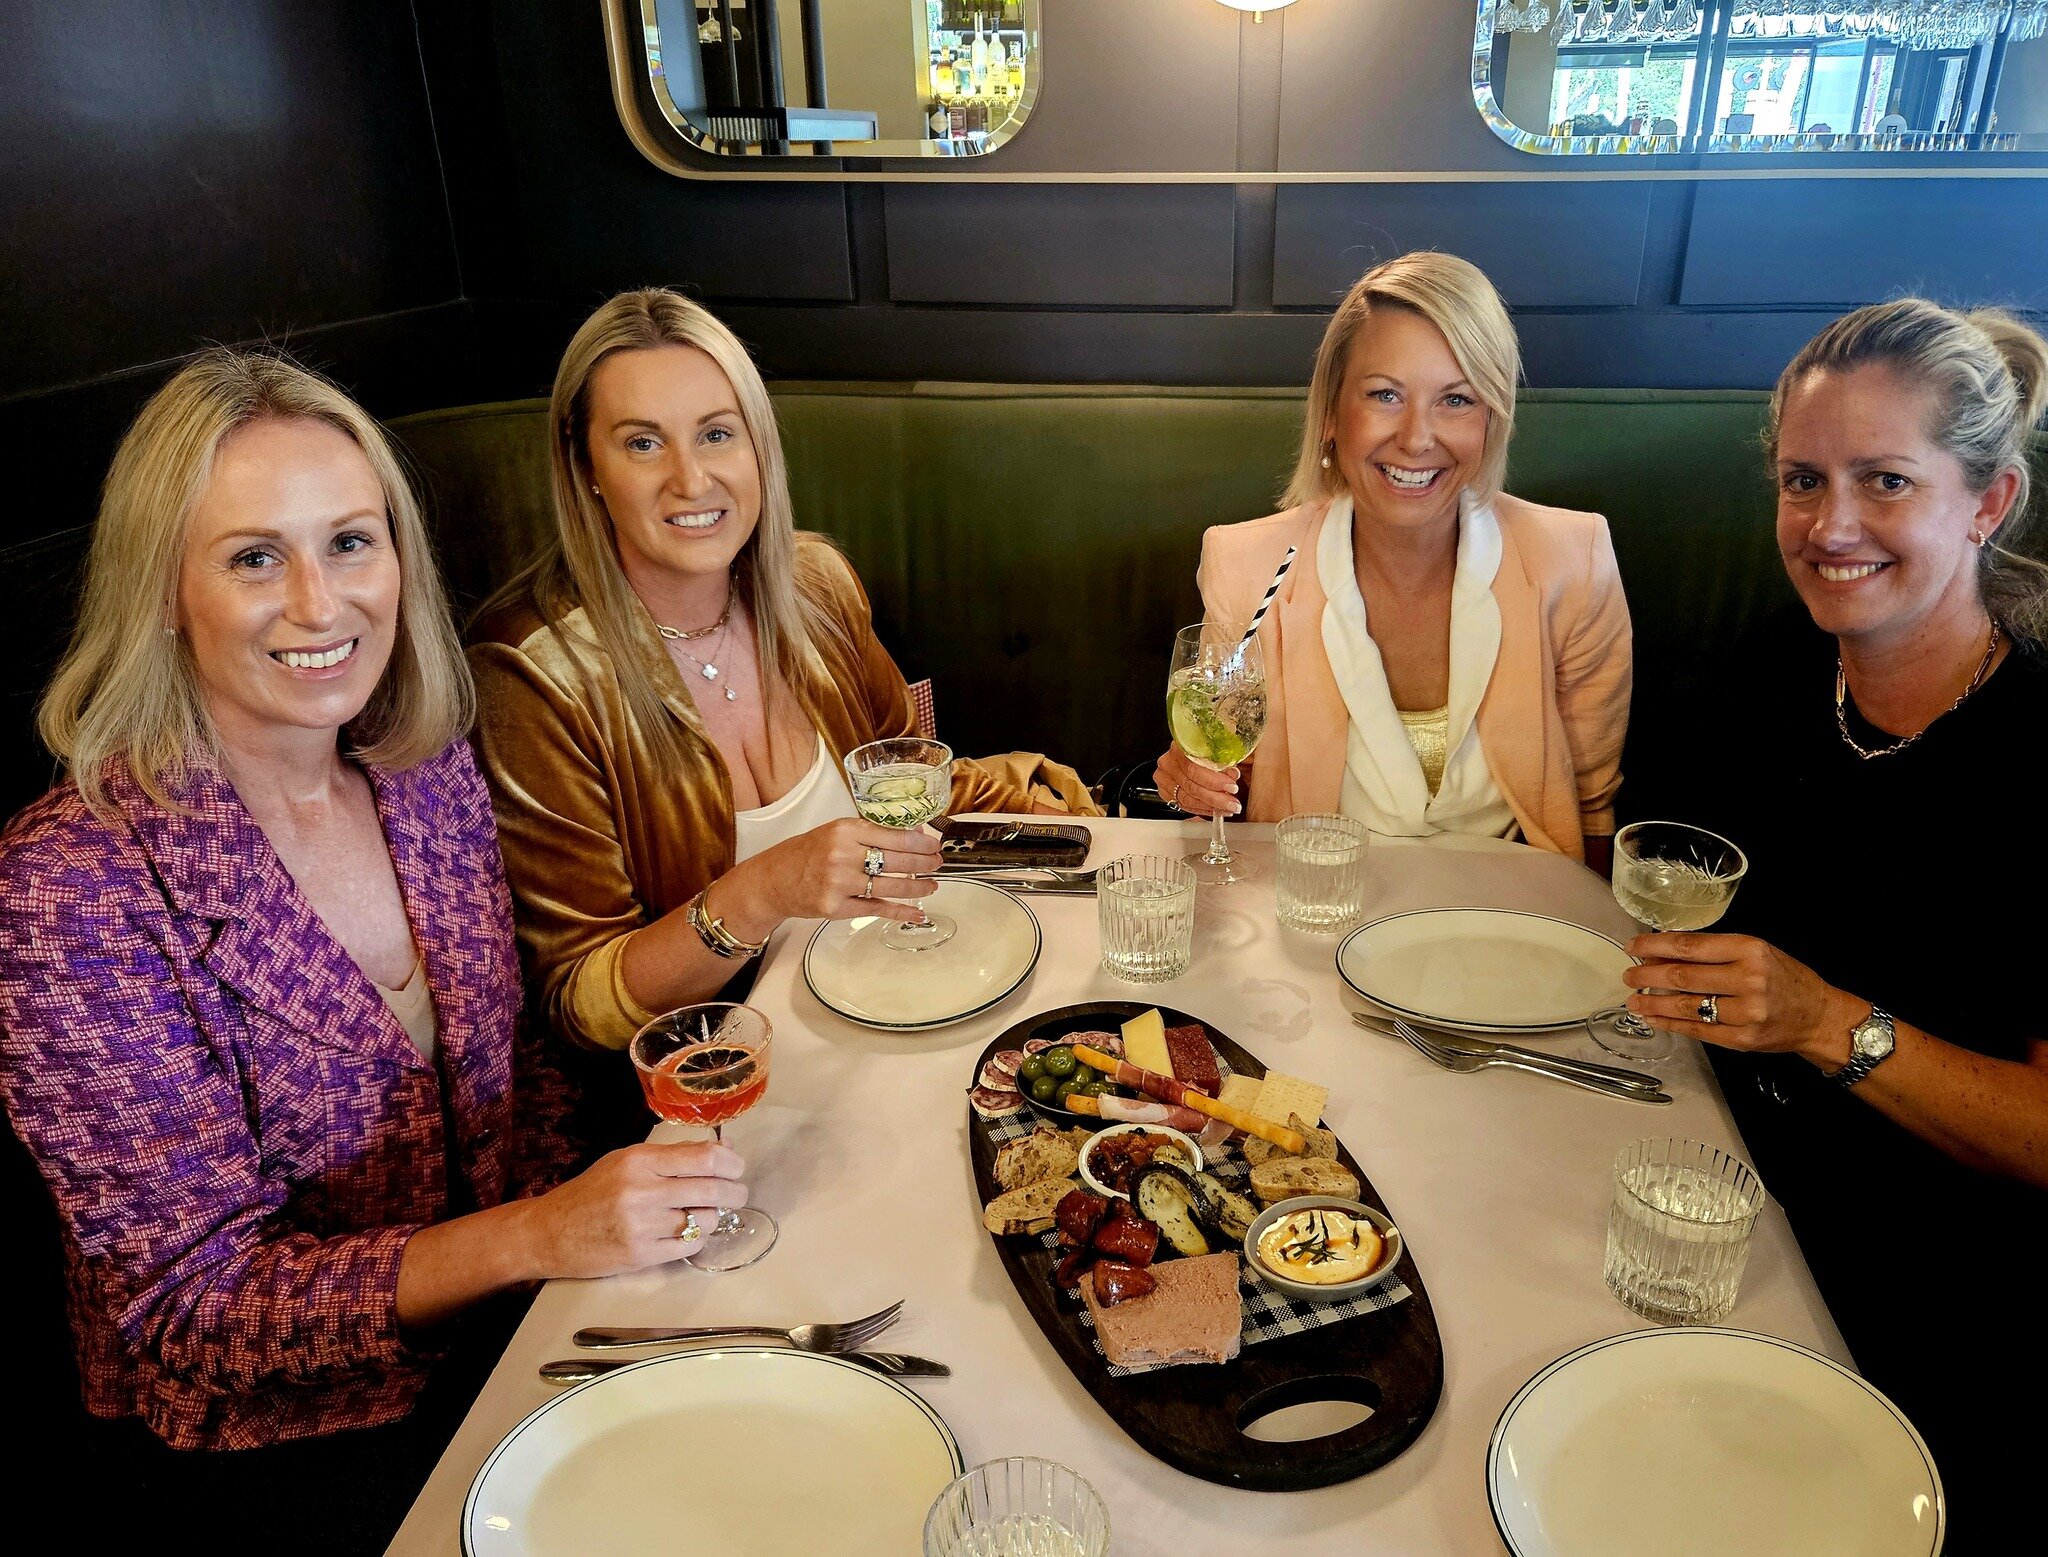 GRAZING GOALS WITH YOUR BESTIES!

Every Tuesday to Saturday 3 - 5.30pm

Indulge in our gorgeous grazing board to share
 + 2 glasses of wine only $55.

We loved having these girls visit for catch ups over the weekend!